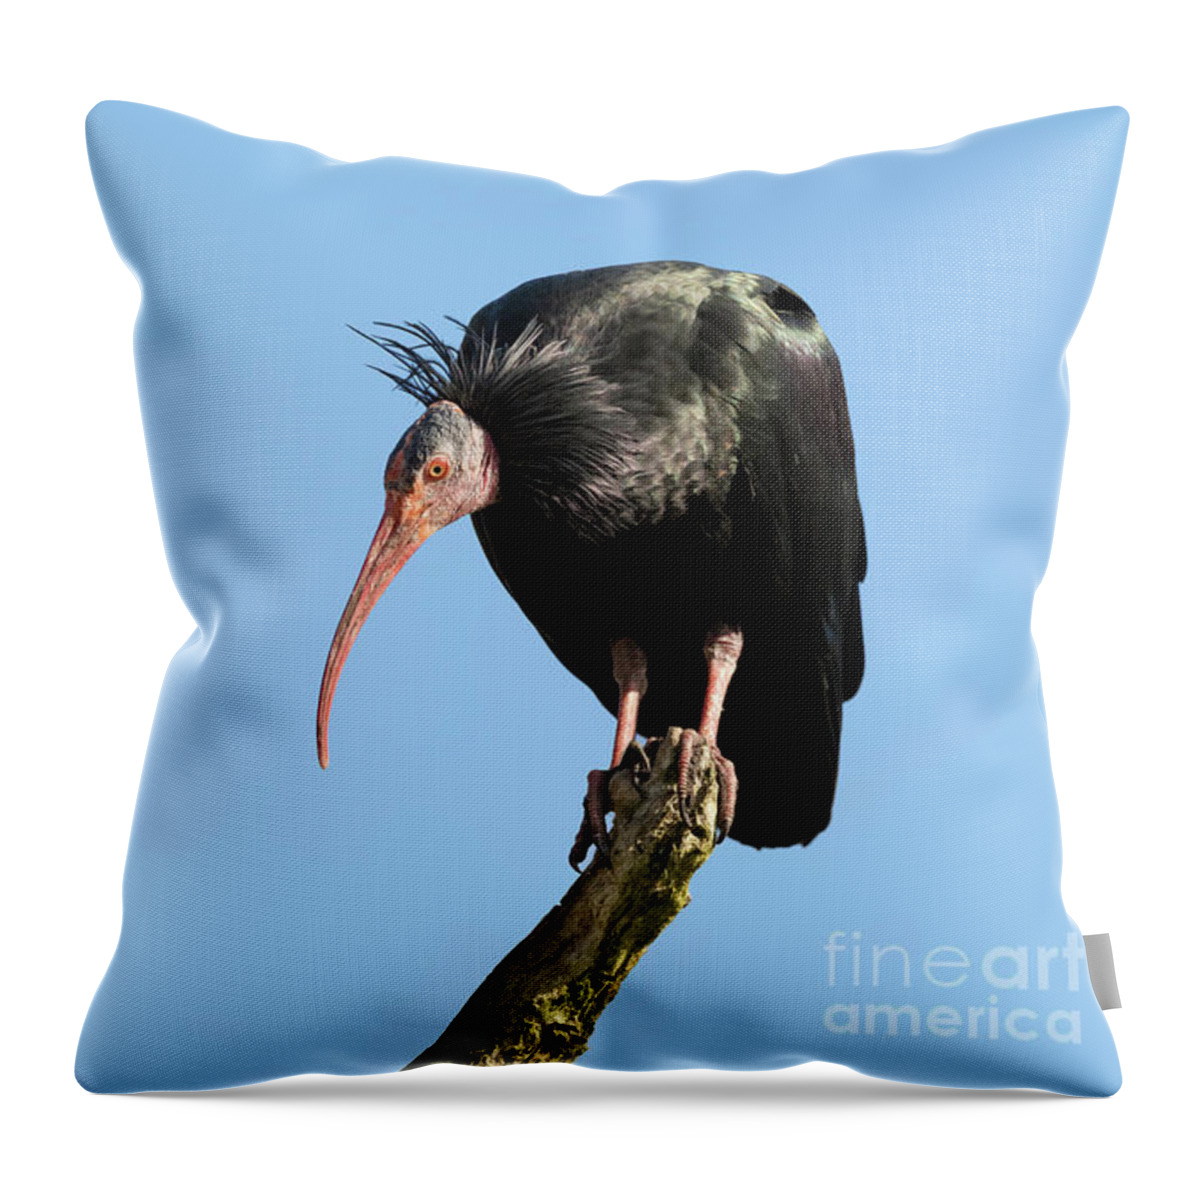 Ibis Throw Pillow featuring the photograph Northern Bald Ibis by Jane Rix